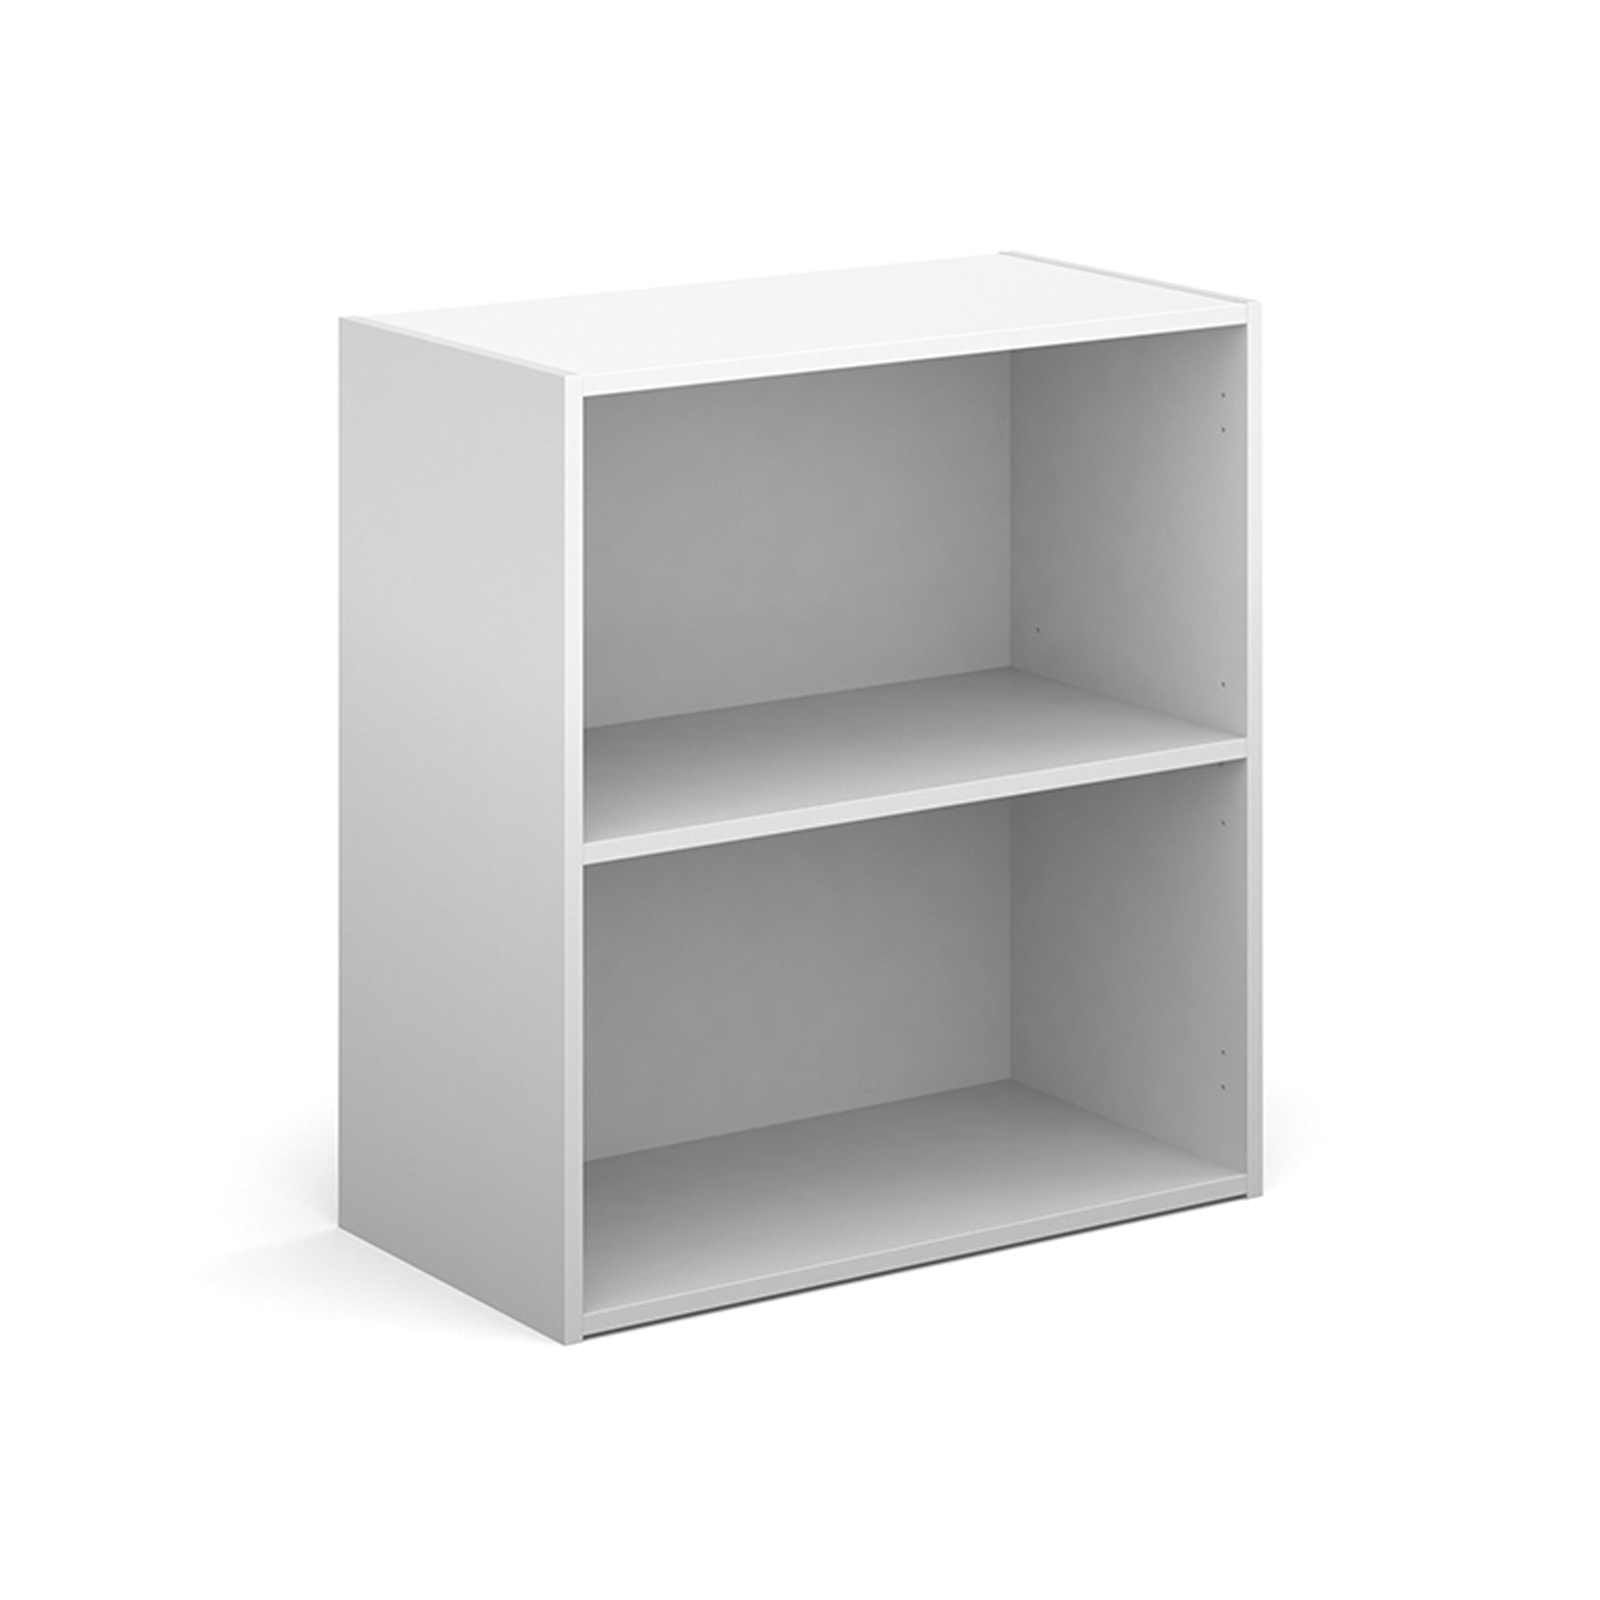 Up To 1200mm High Contract bookcase 830mm high with 1 shelf - white